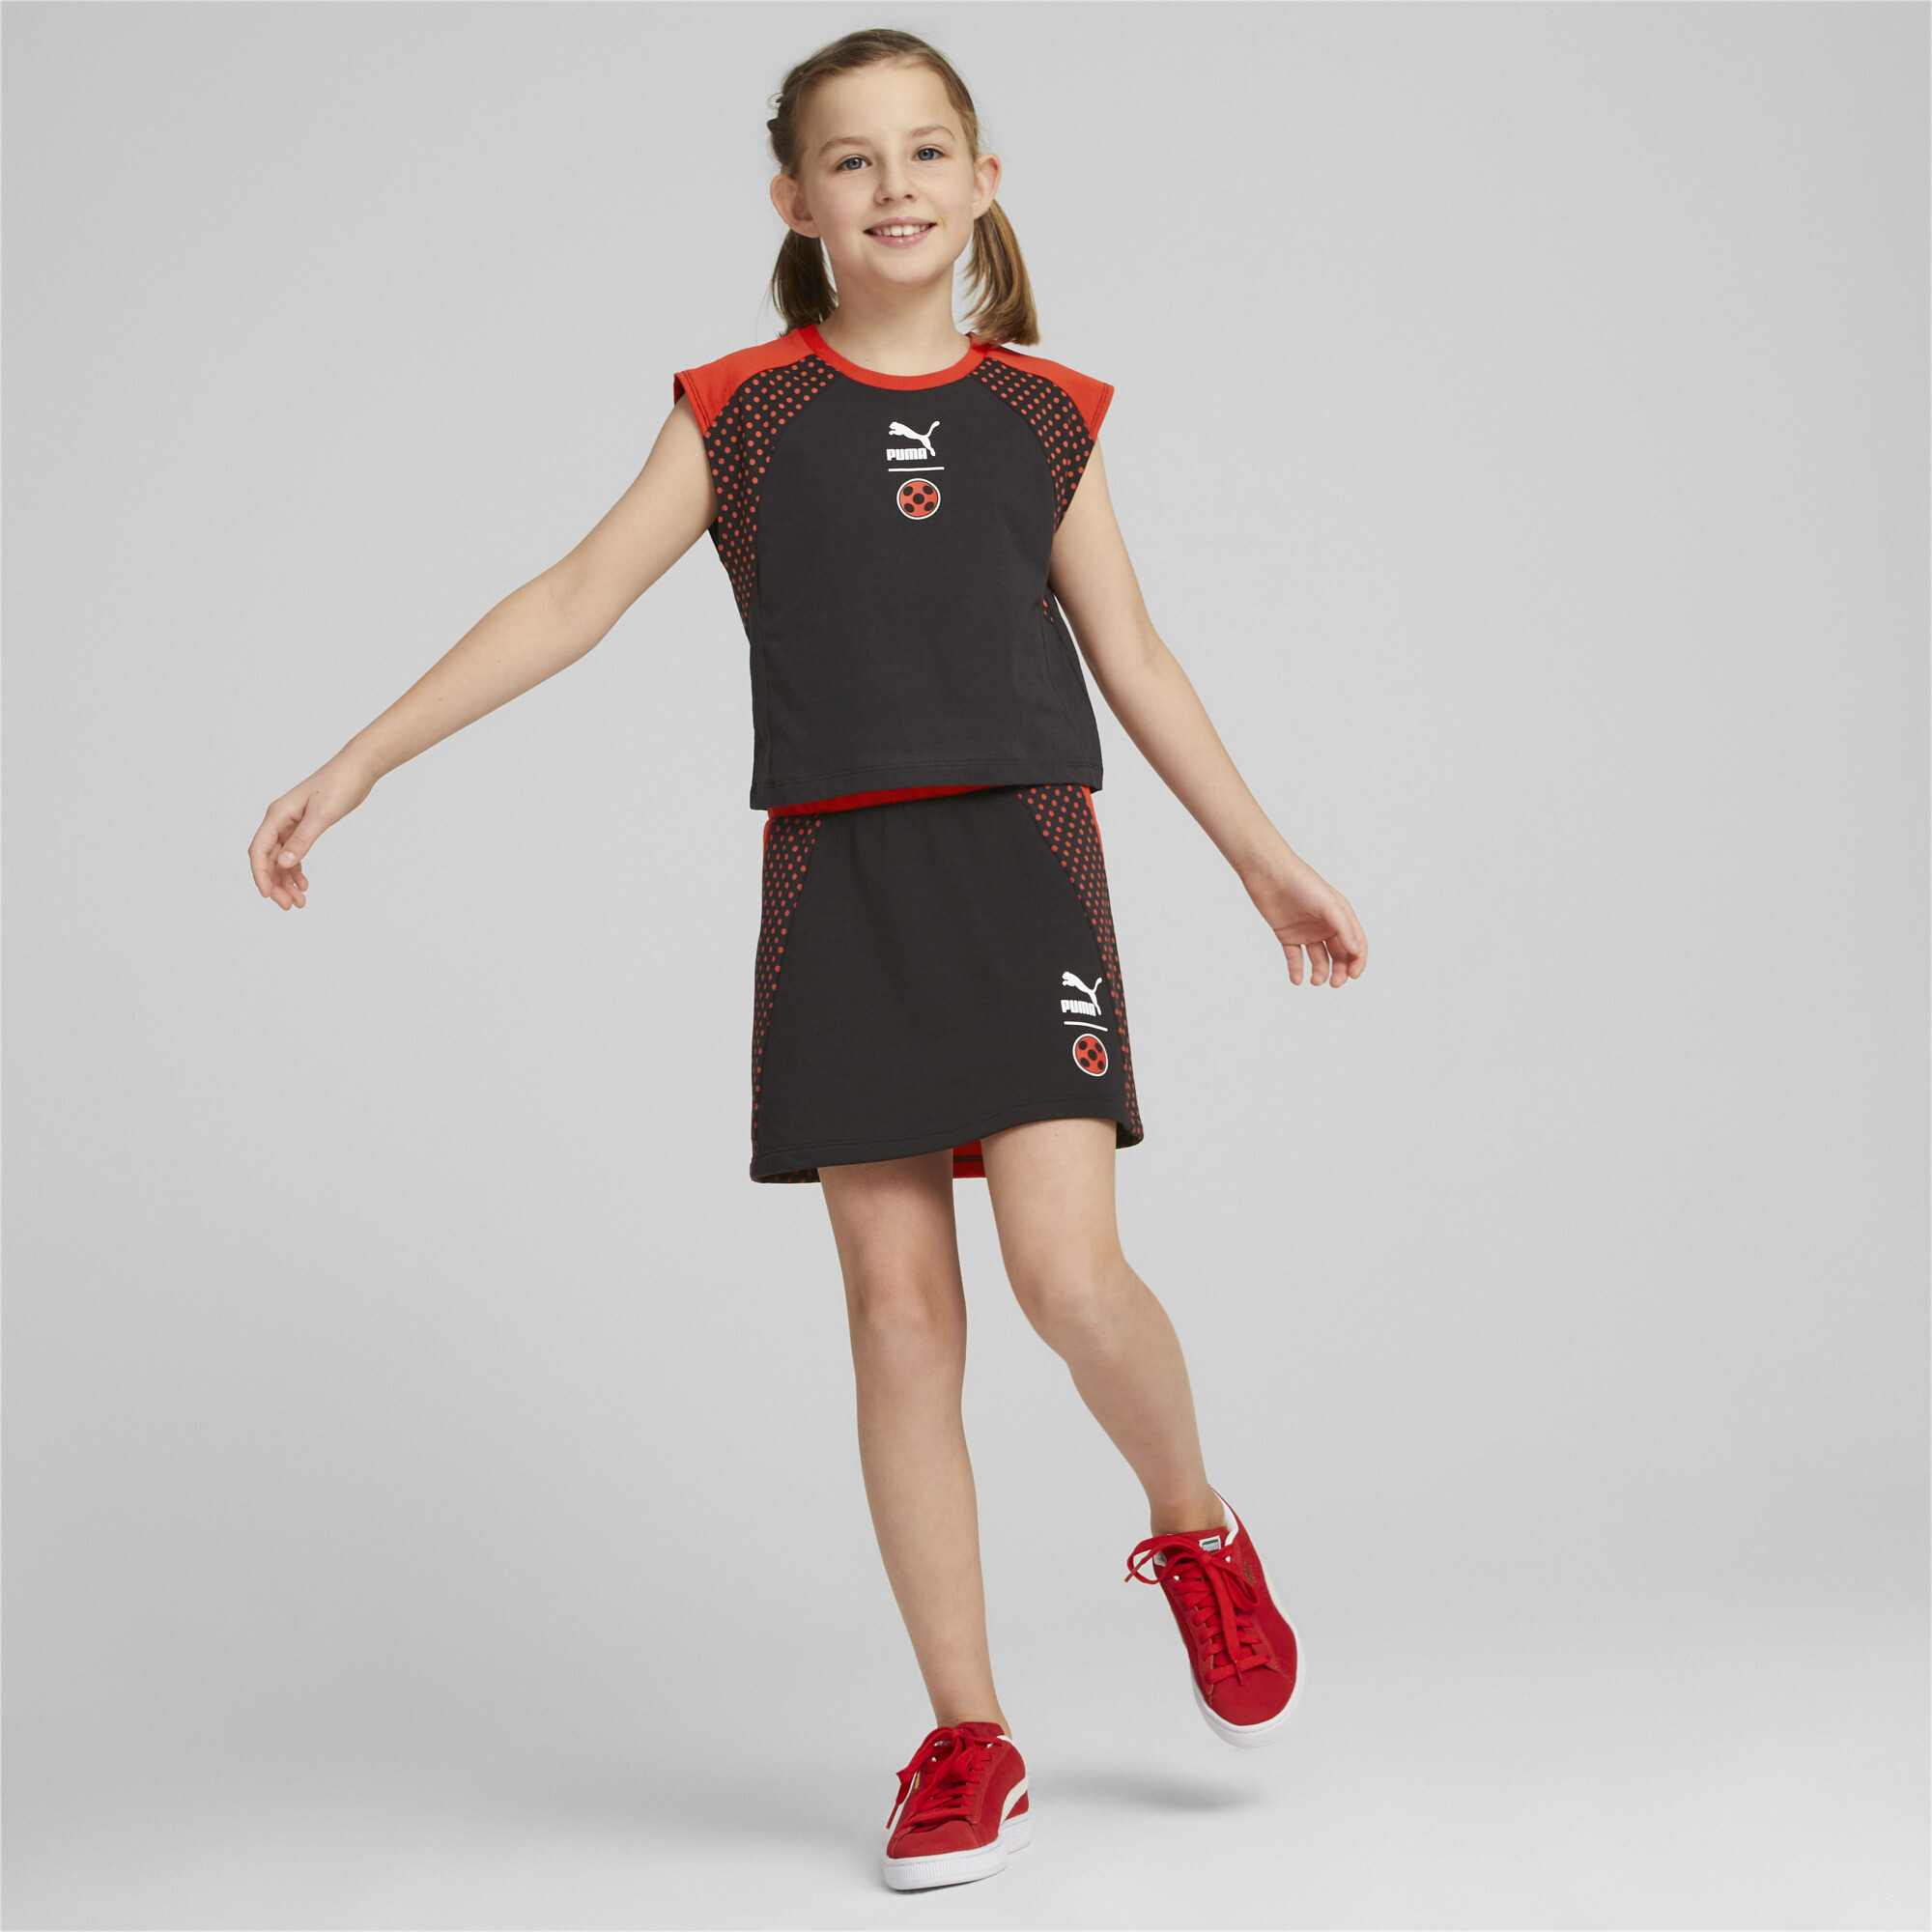 PUMA X MIRACULOUS Skirt In Black, Size 13-14 Youth